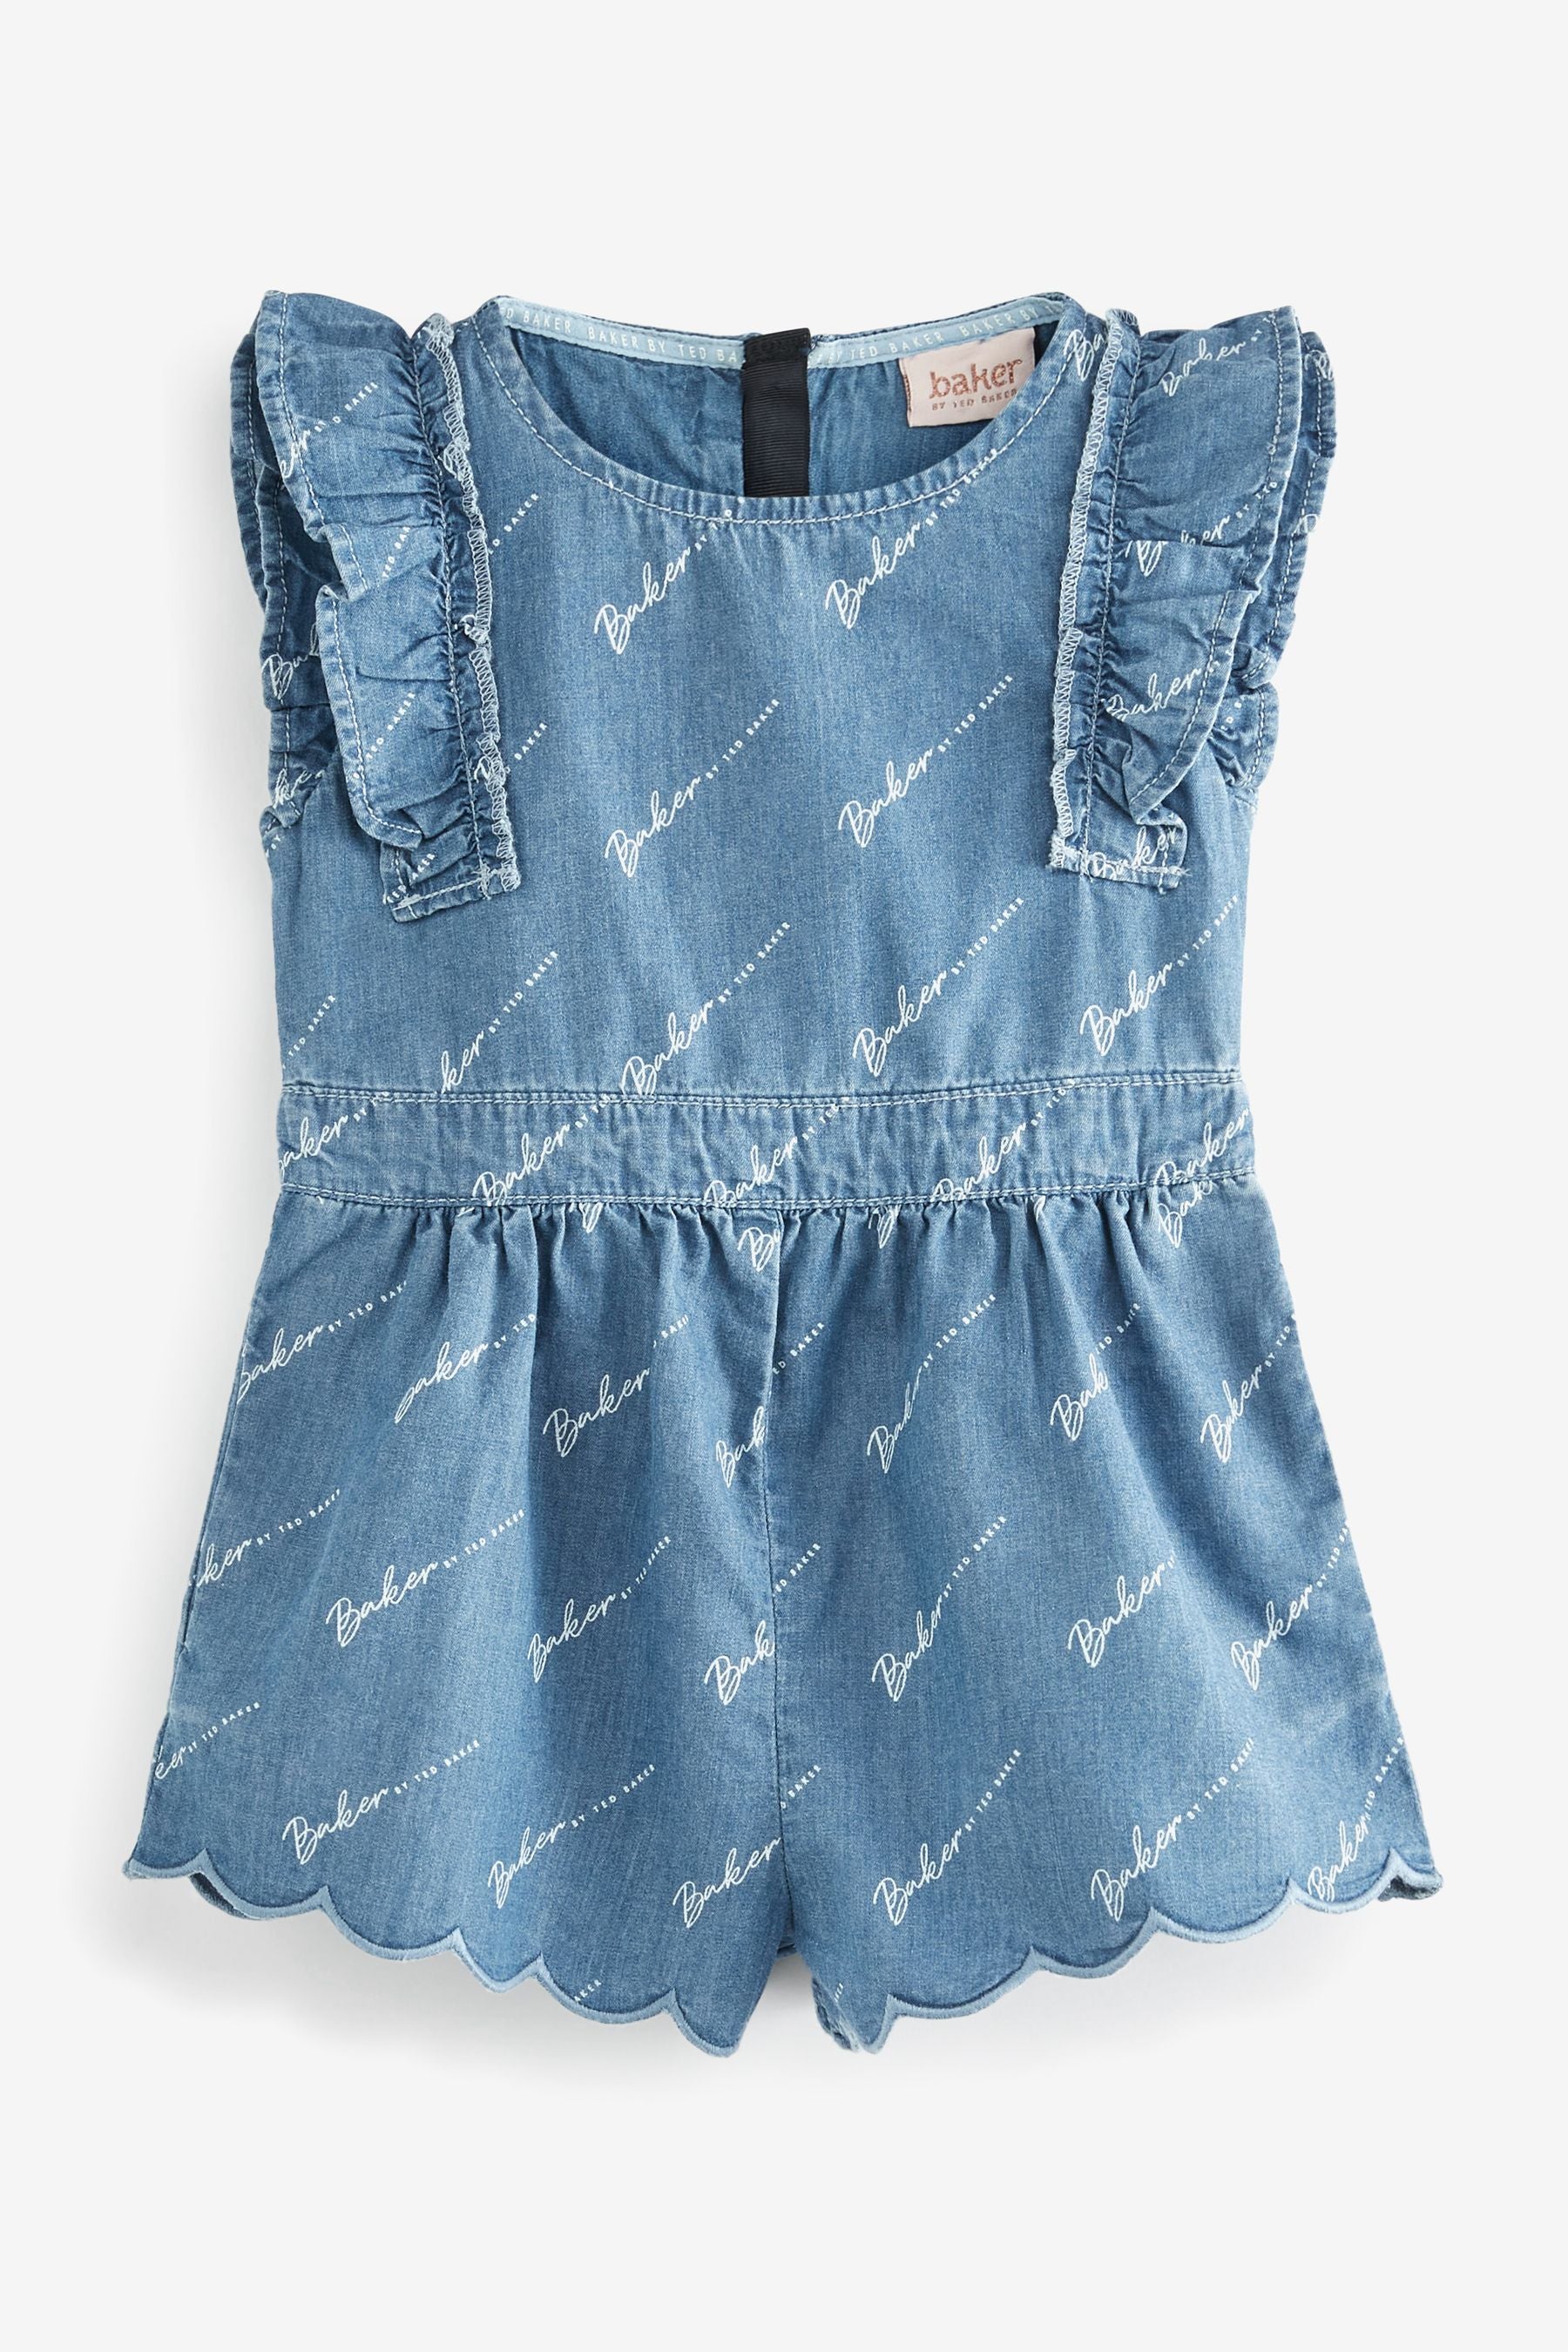 Baker by Ted Baker Blue Chambray Playsuit